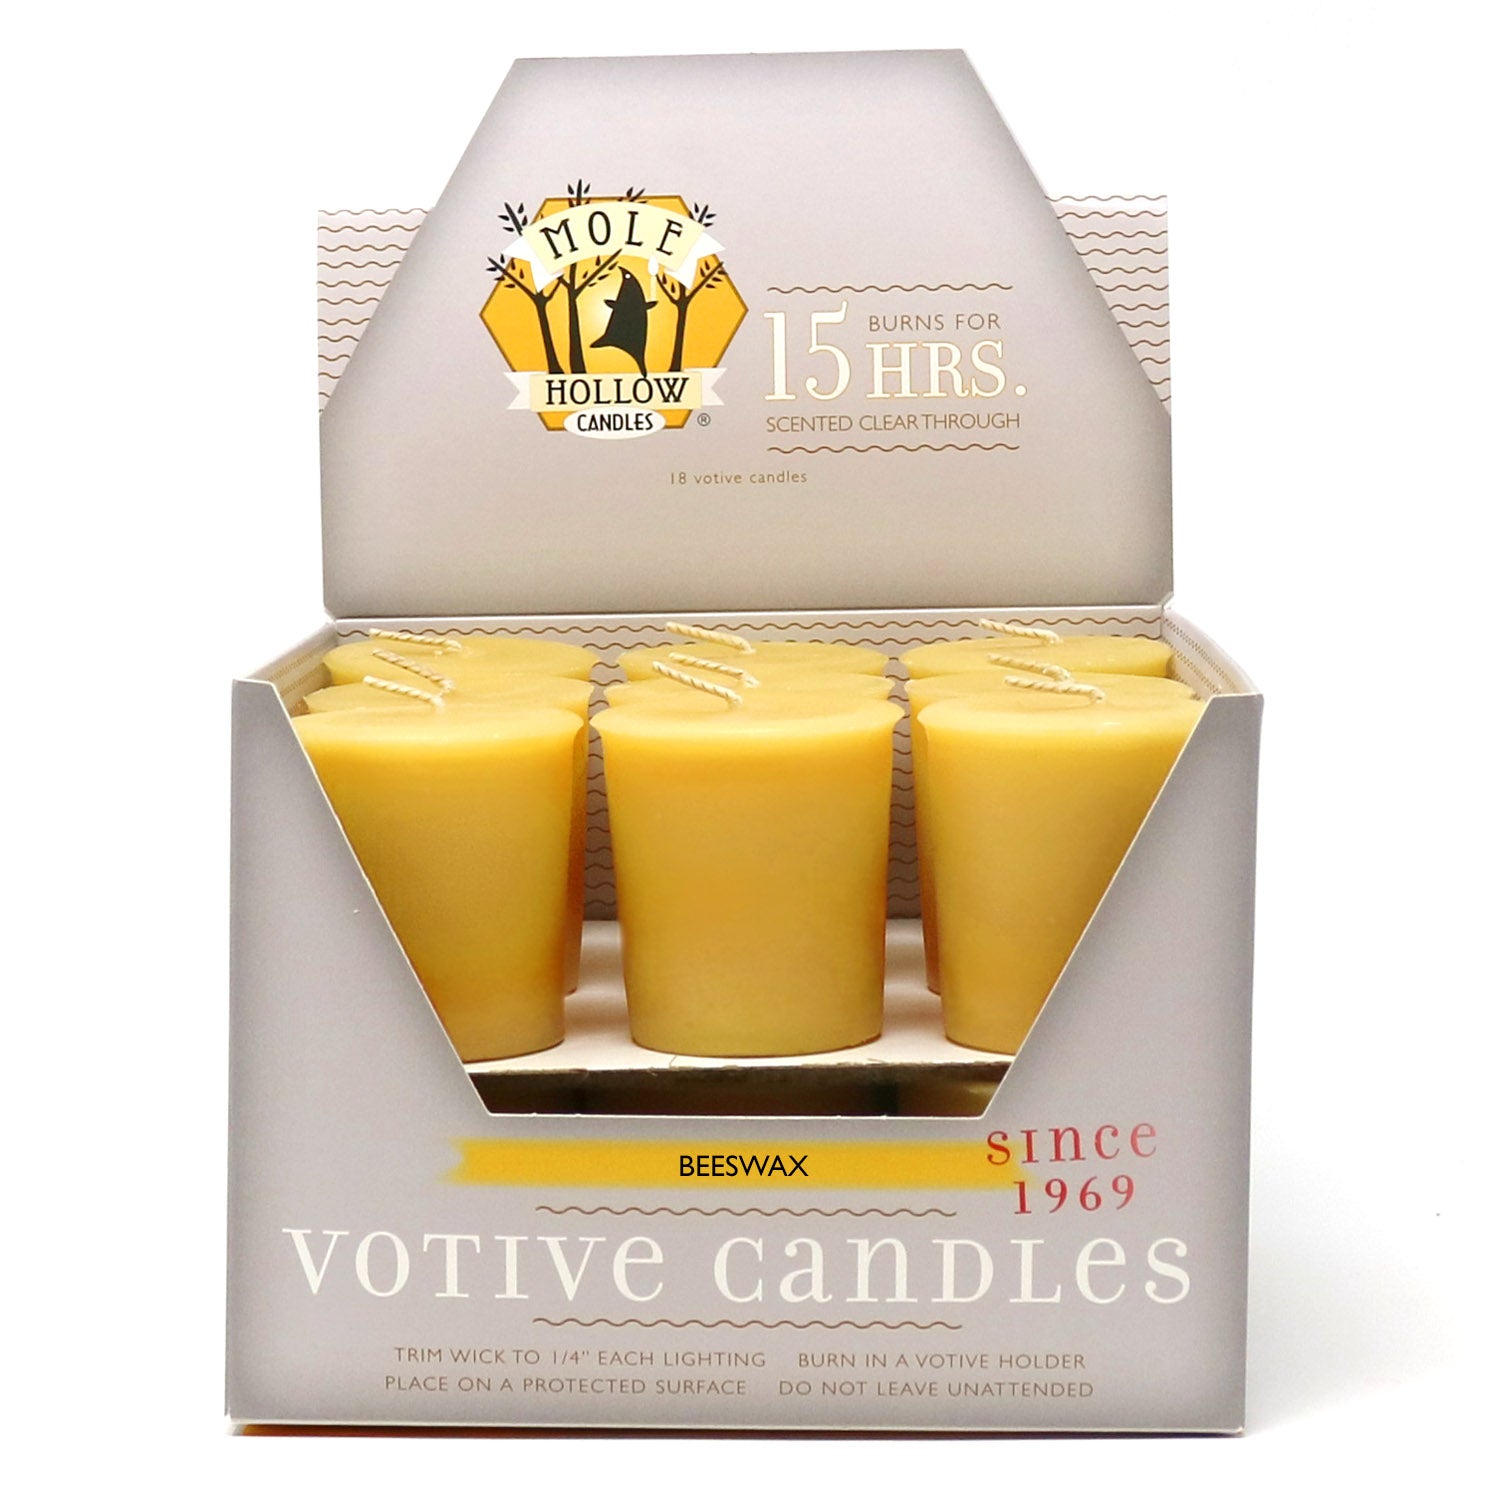 Beeswax Votive Candles - Beeswax Votives - Mole Hollow Candles